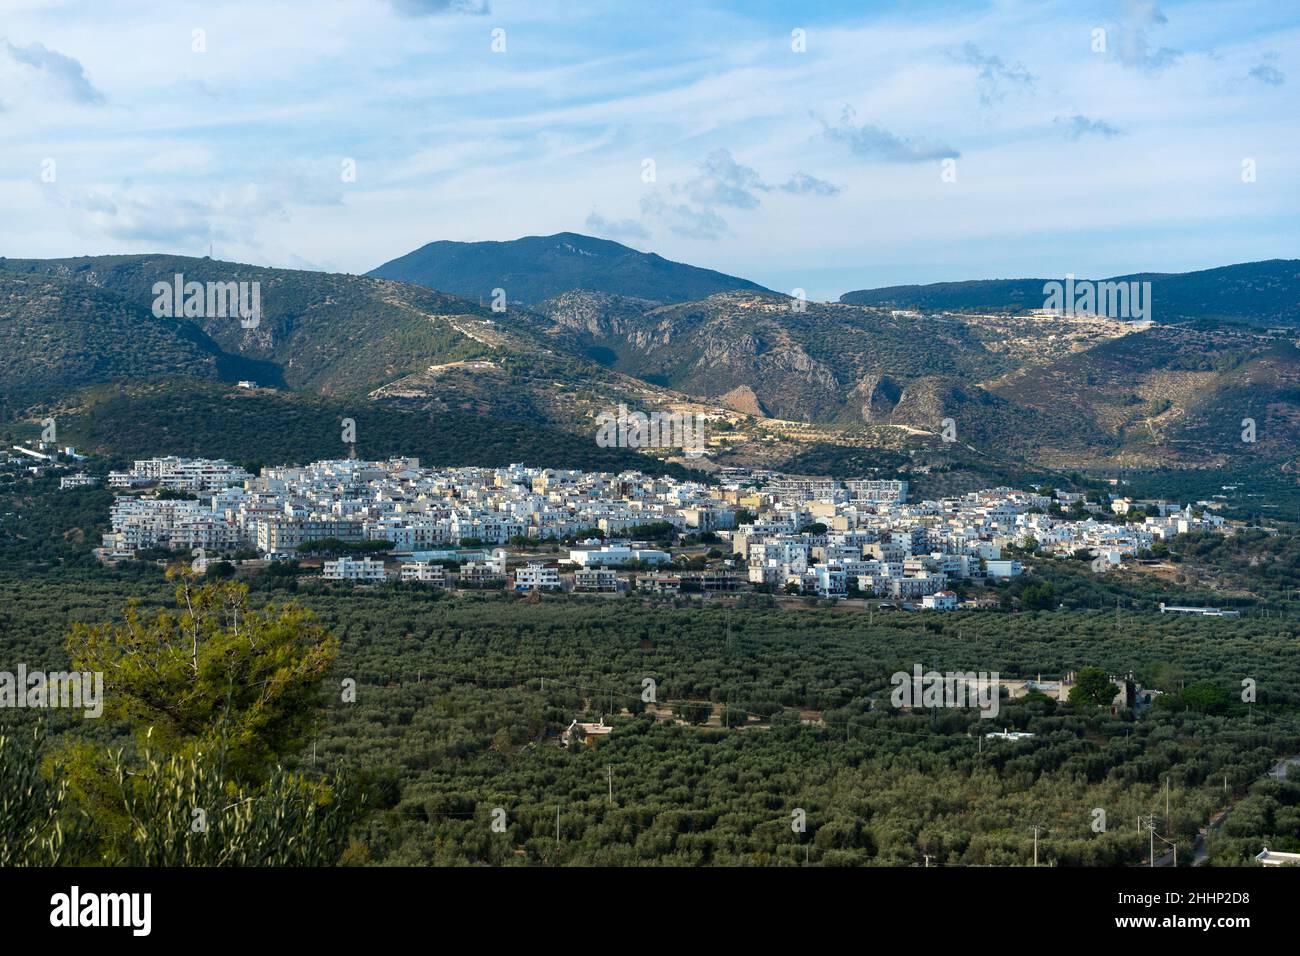 Mattinata, Puglia, Italy: panoramic image of the city surrounded by olive trees Stock Photo